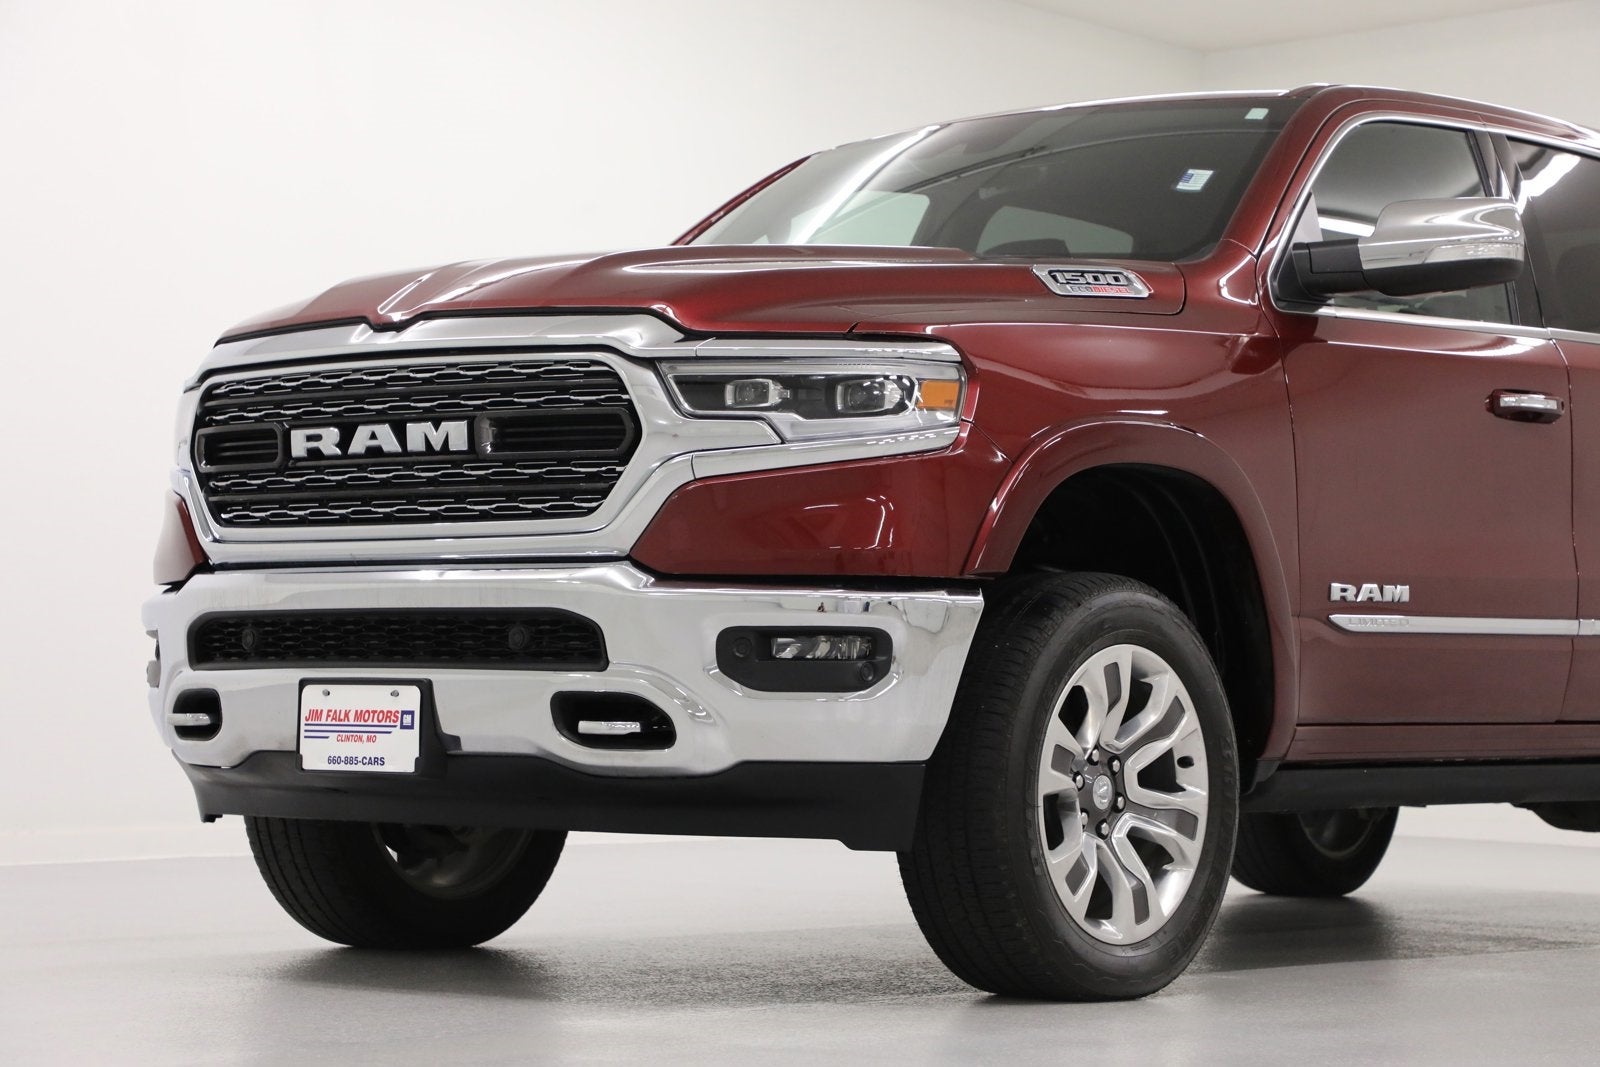 2022 RAM 1500 Crew Cab Limited 4WD Heated Cooled Leather Memory Remote Start 20 Inch Wheels HD Camera Intellibeam